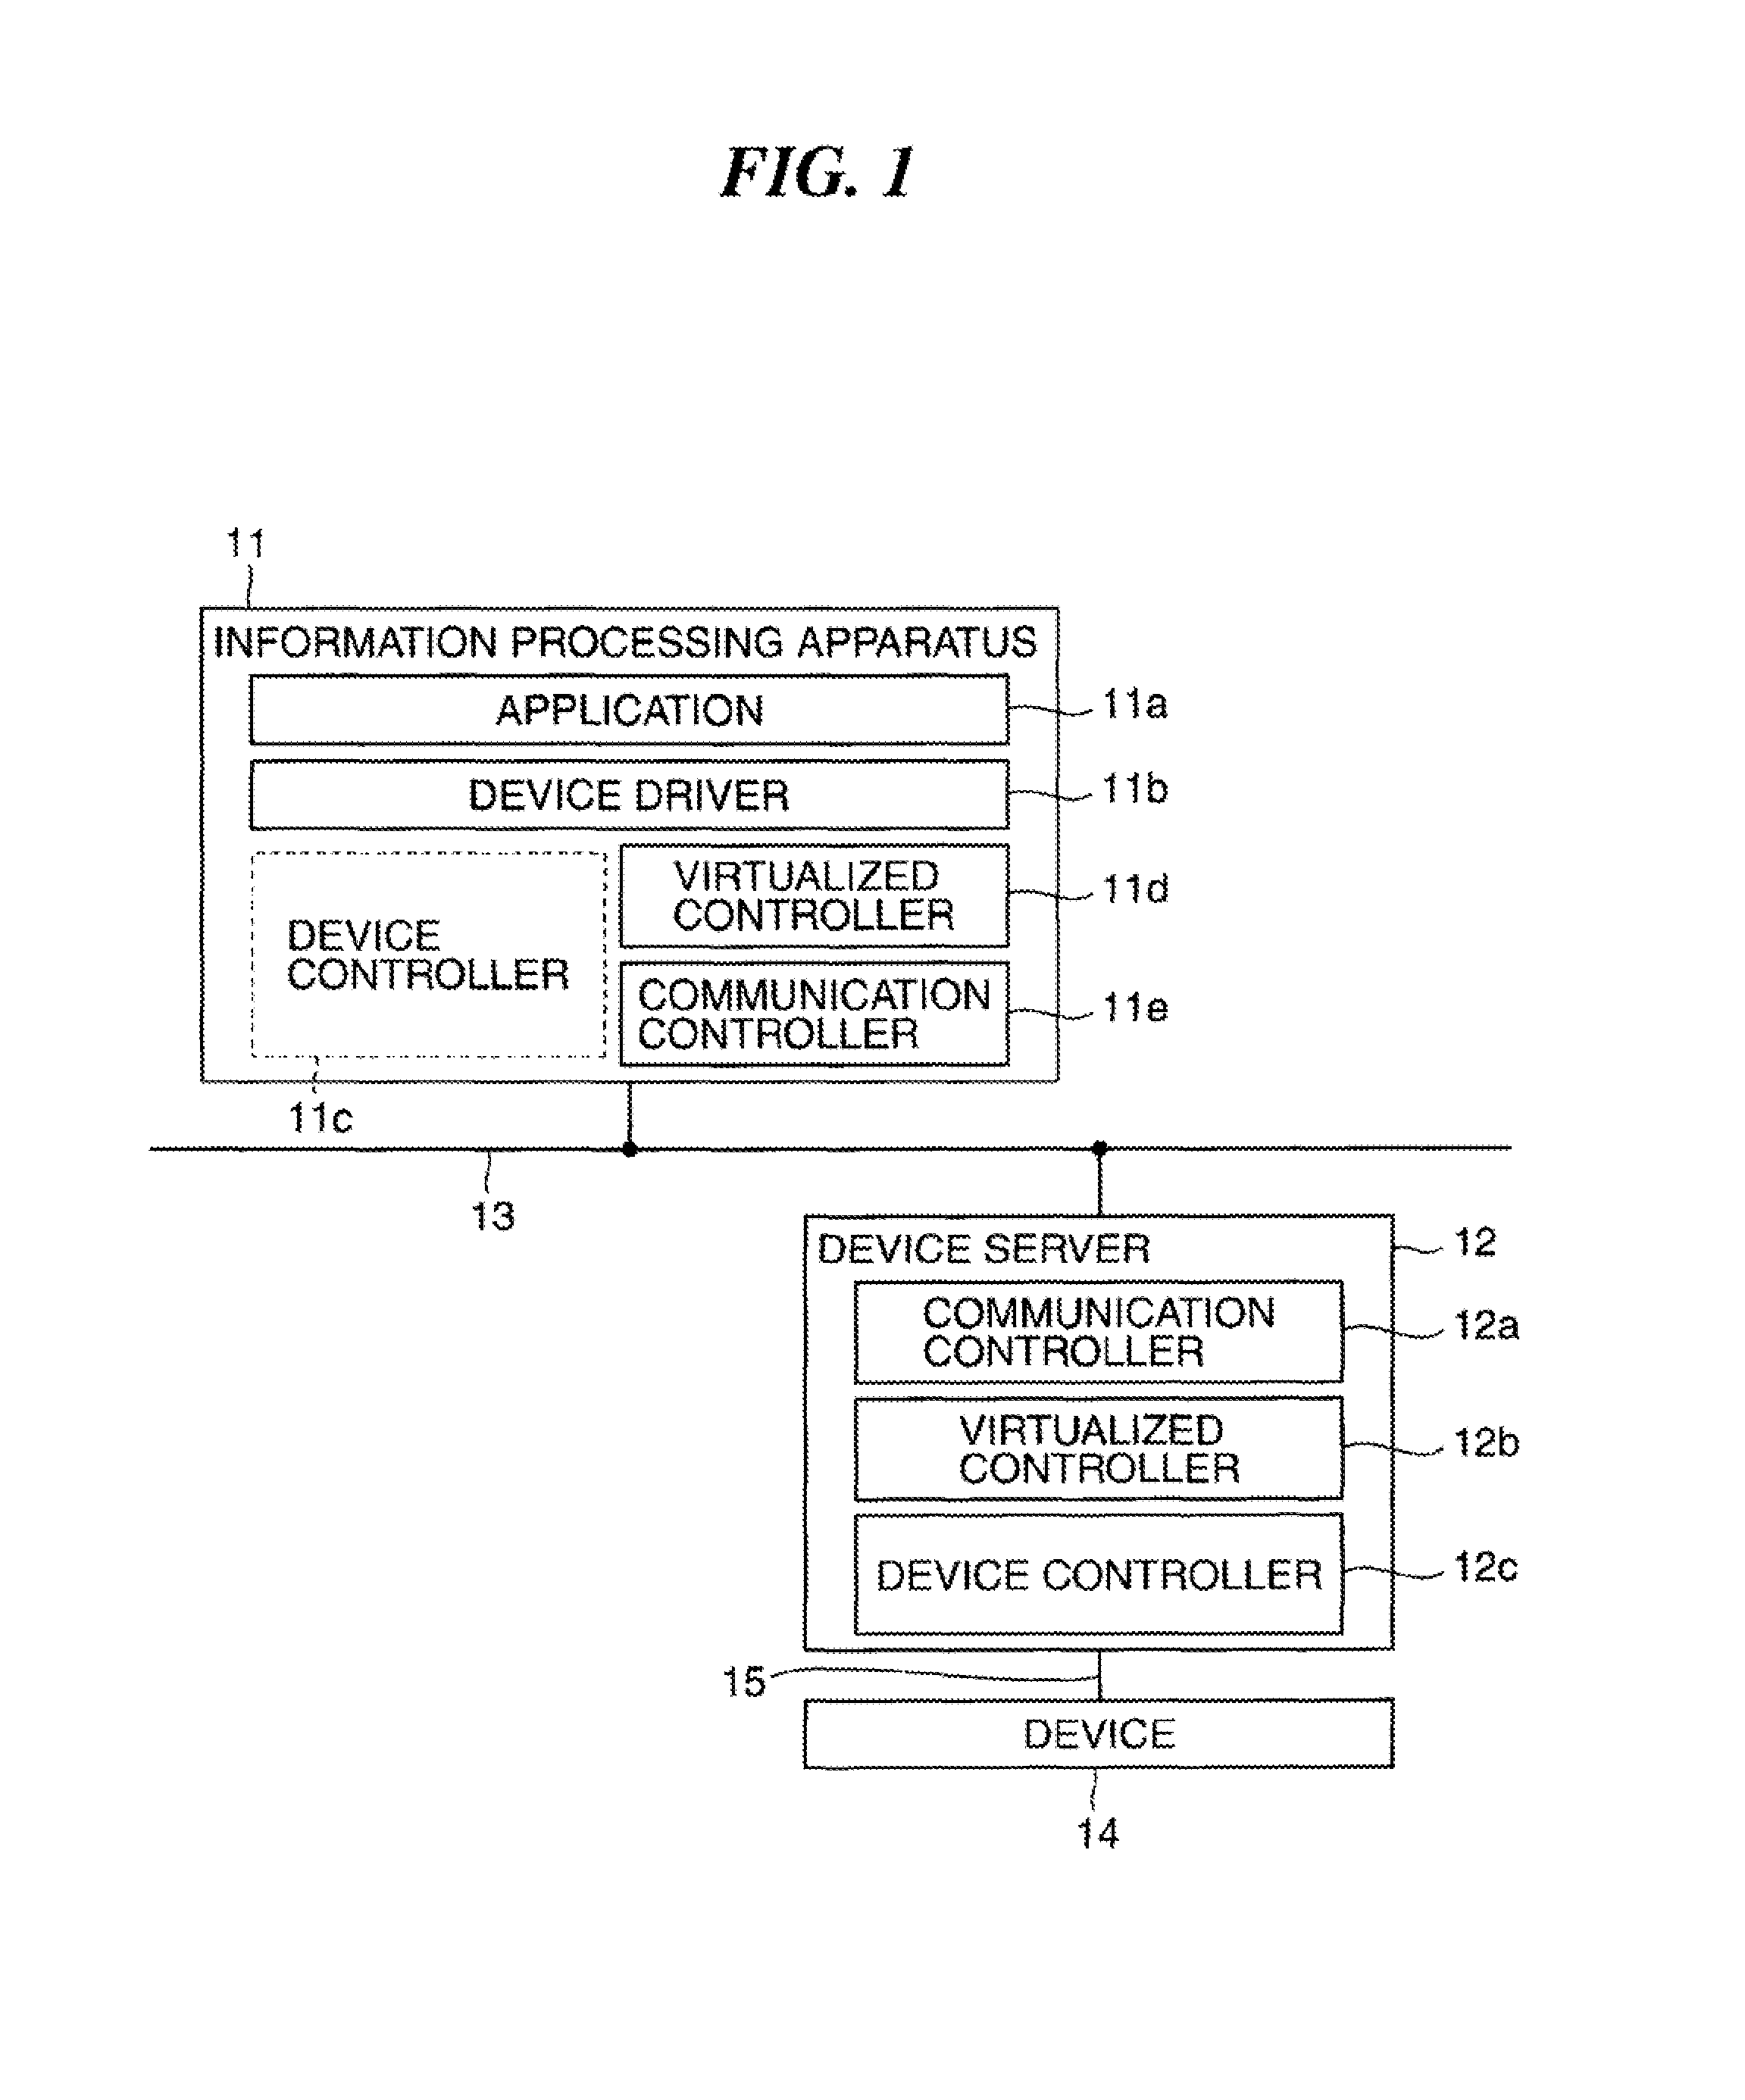 Information processing apparatus that controls device via network and method of controlling the apparatus, device control apparatus and method of controlling the apparatus, as well as device control system